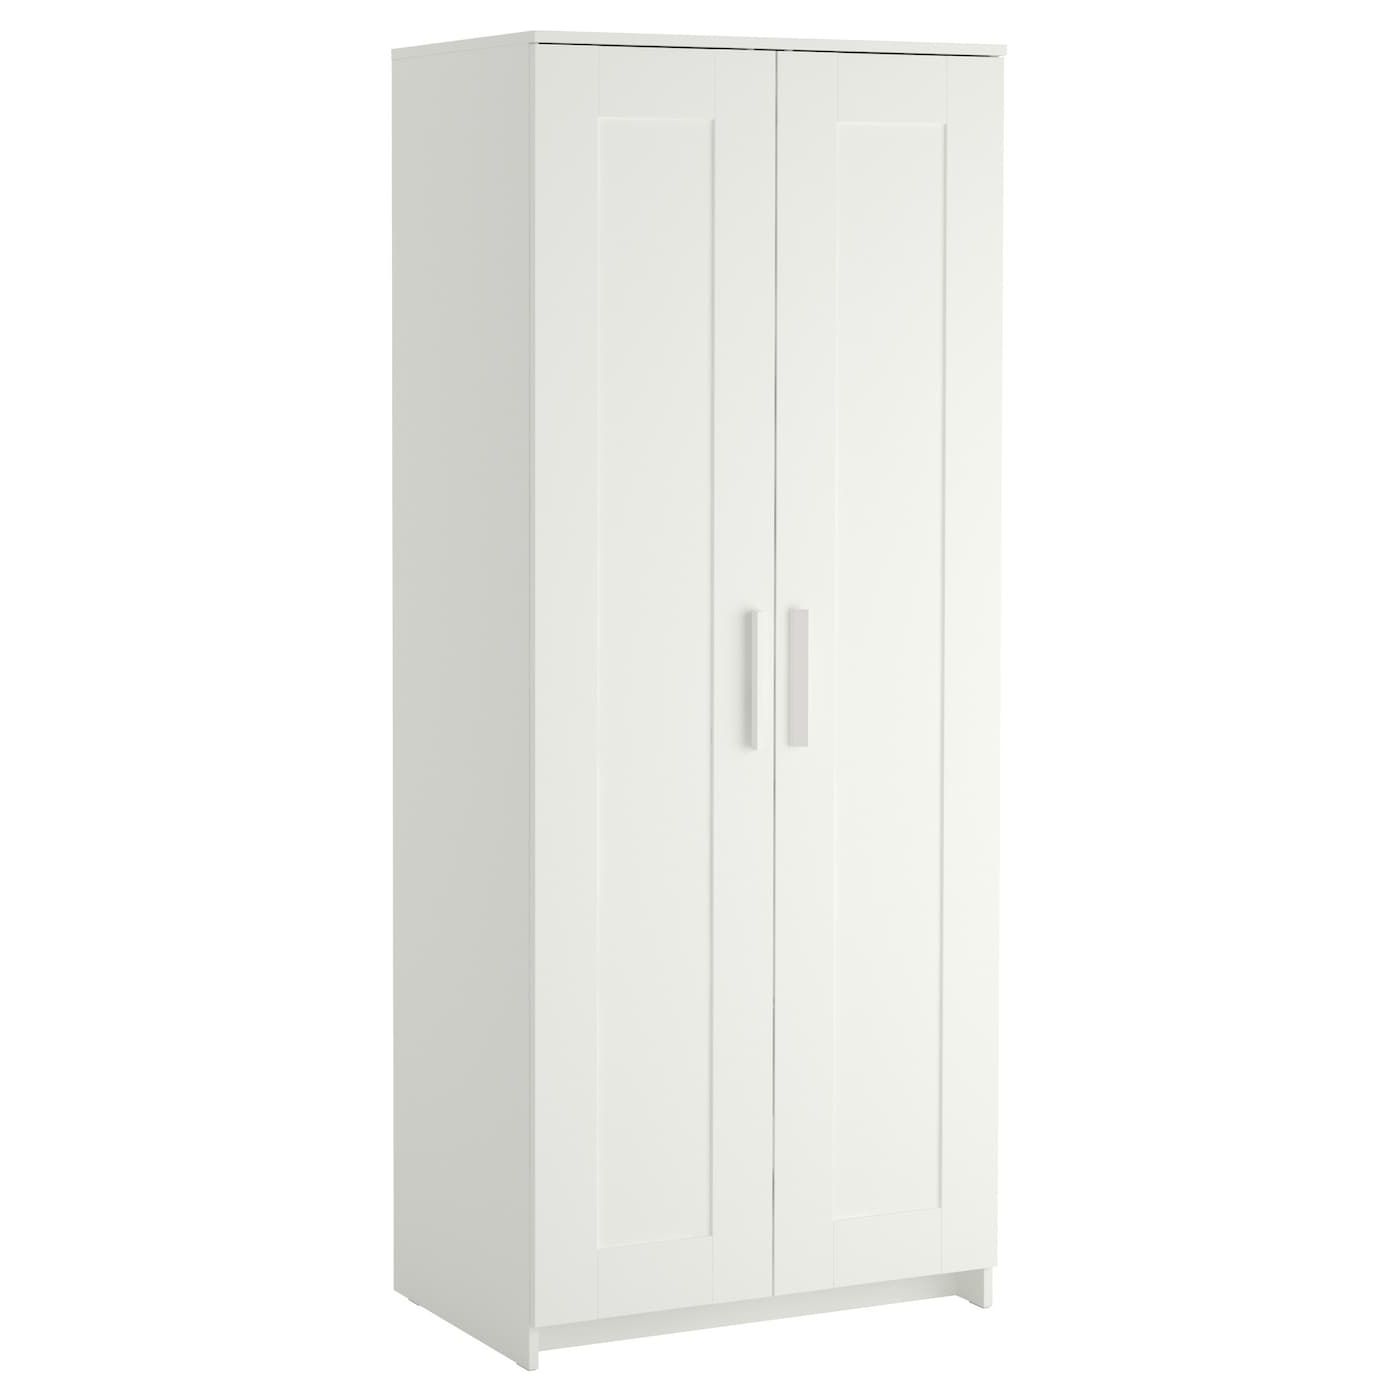 Most Current 2 Door Wardrobes Intended For Brimnes Wardrobe With 2 Doors, White, 30 3/4x74 3/4" – Ikea (View 9 of 10)